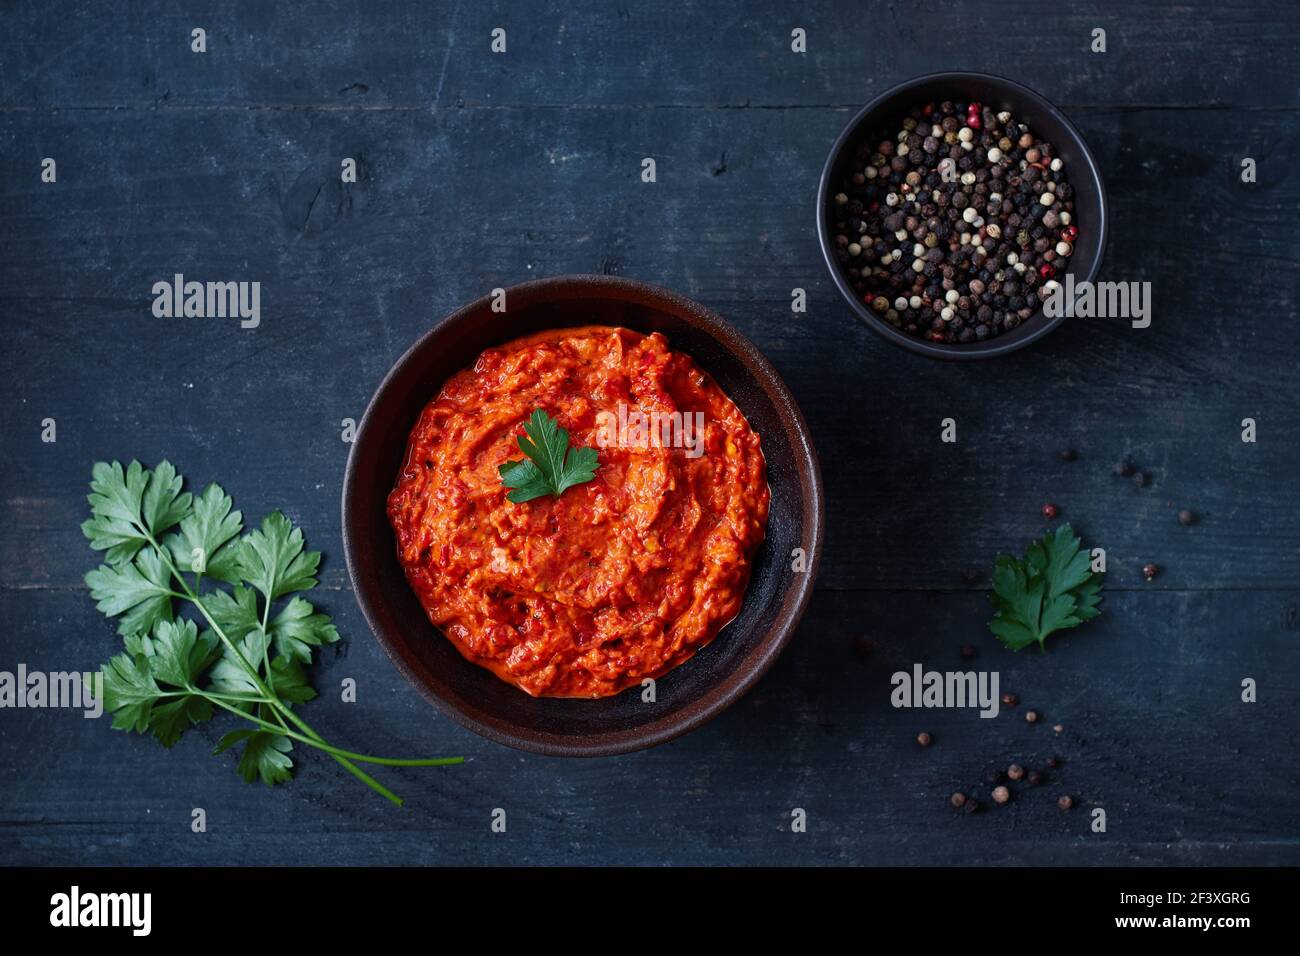 Ajvar (spicy pepper sauce from the Balkans) in a bowl Stock Photo